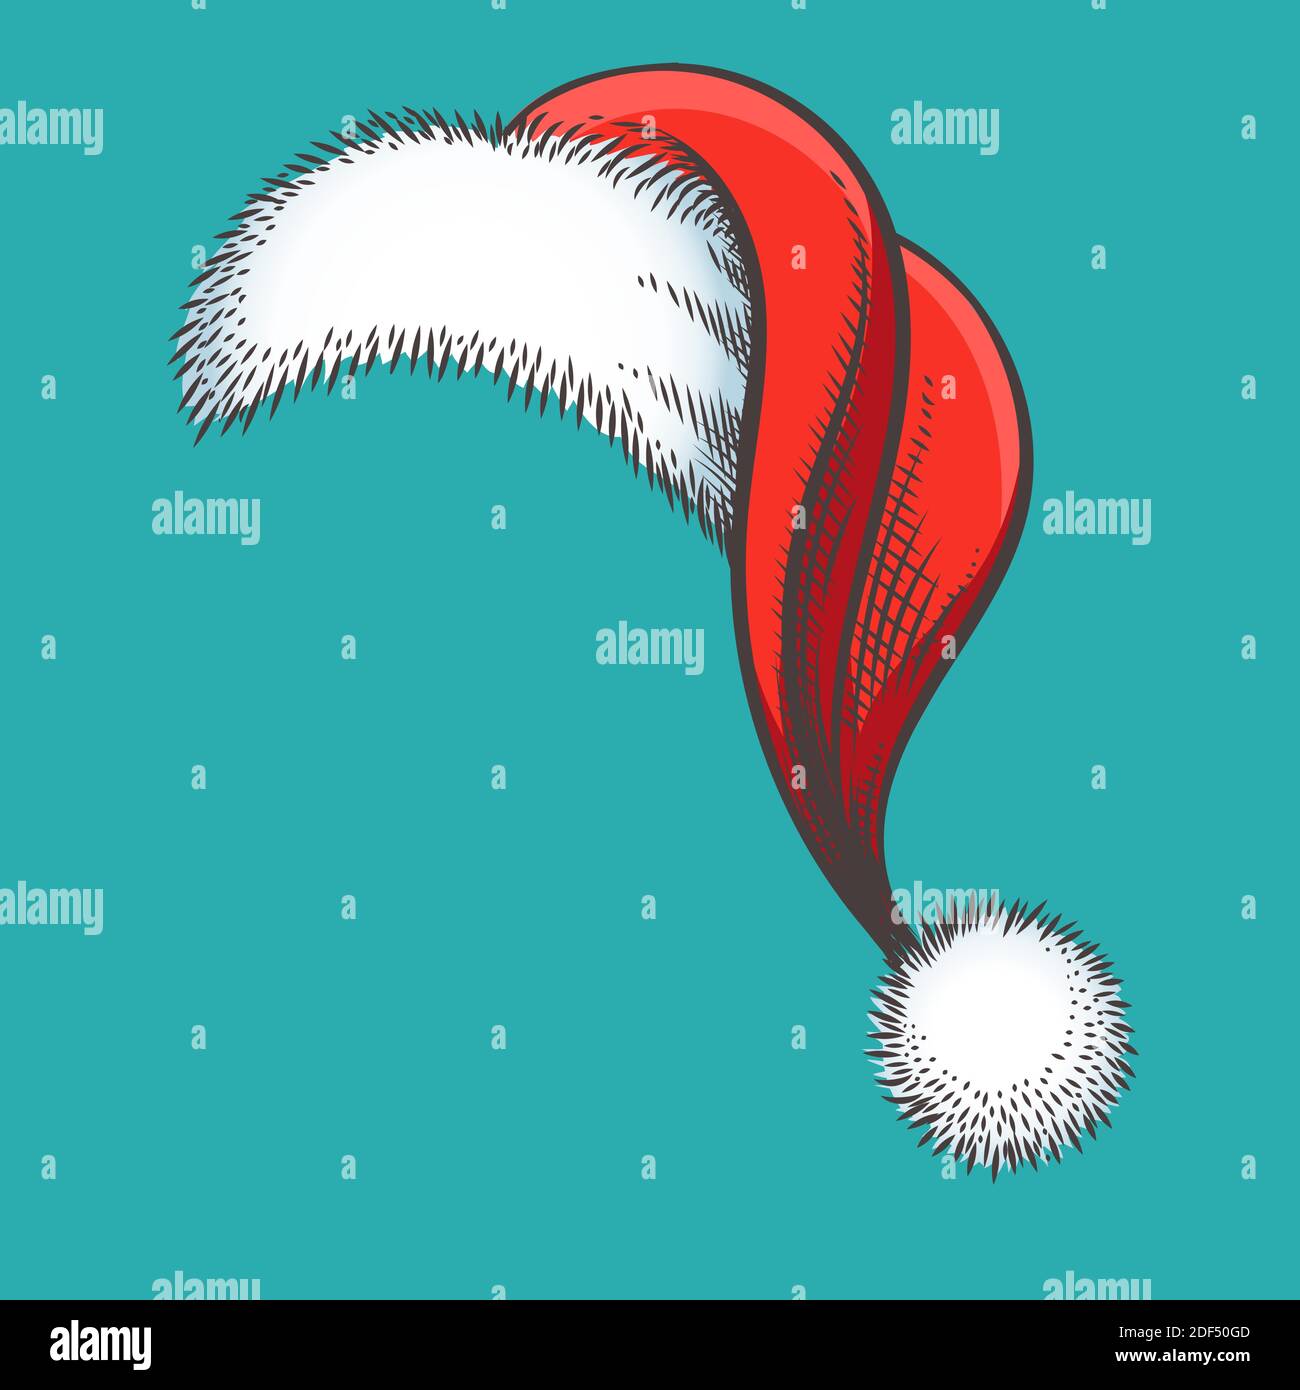 Colorful Sketch of Red Santa Claus Hat. Vector Illustration. Stock Vector